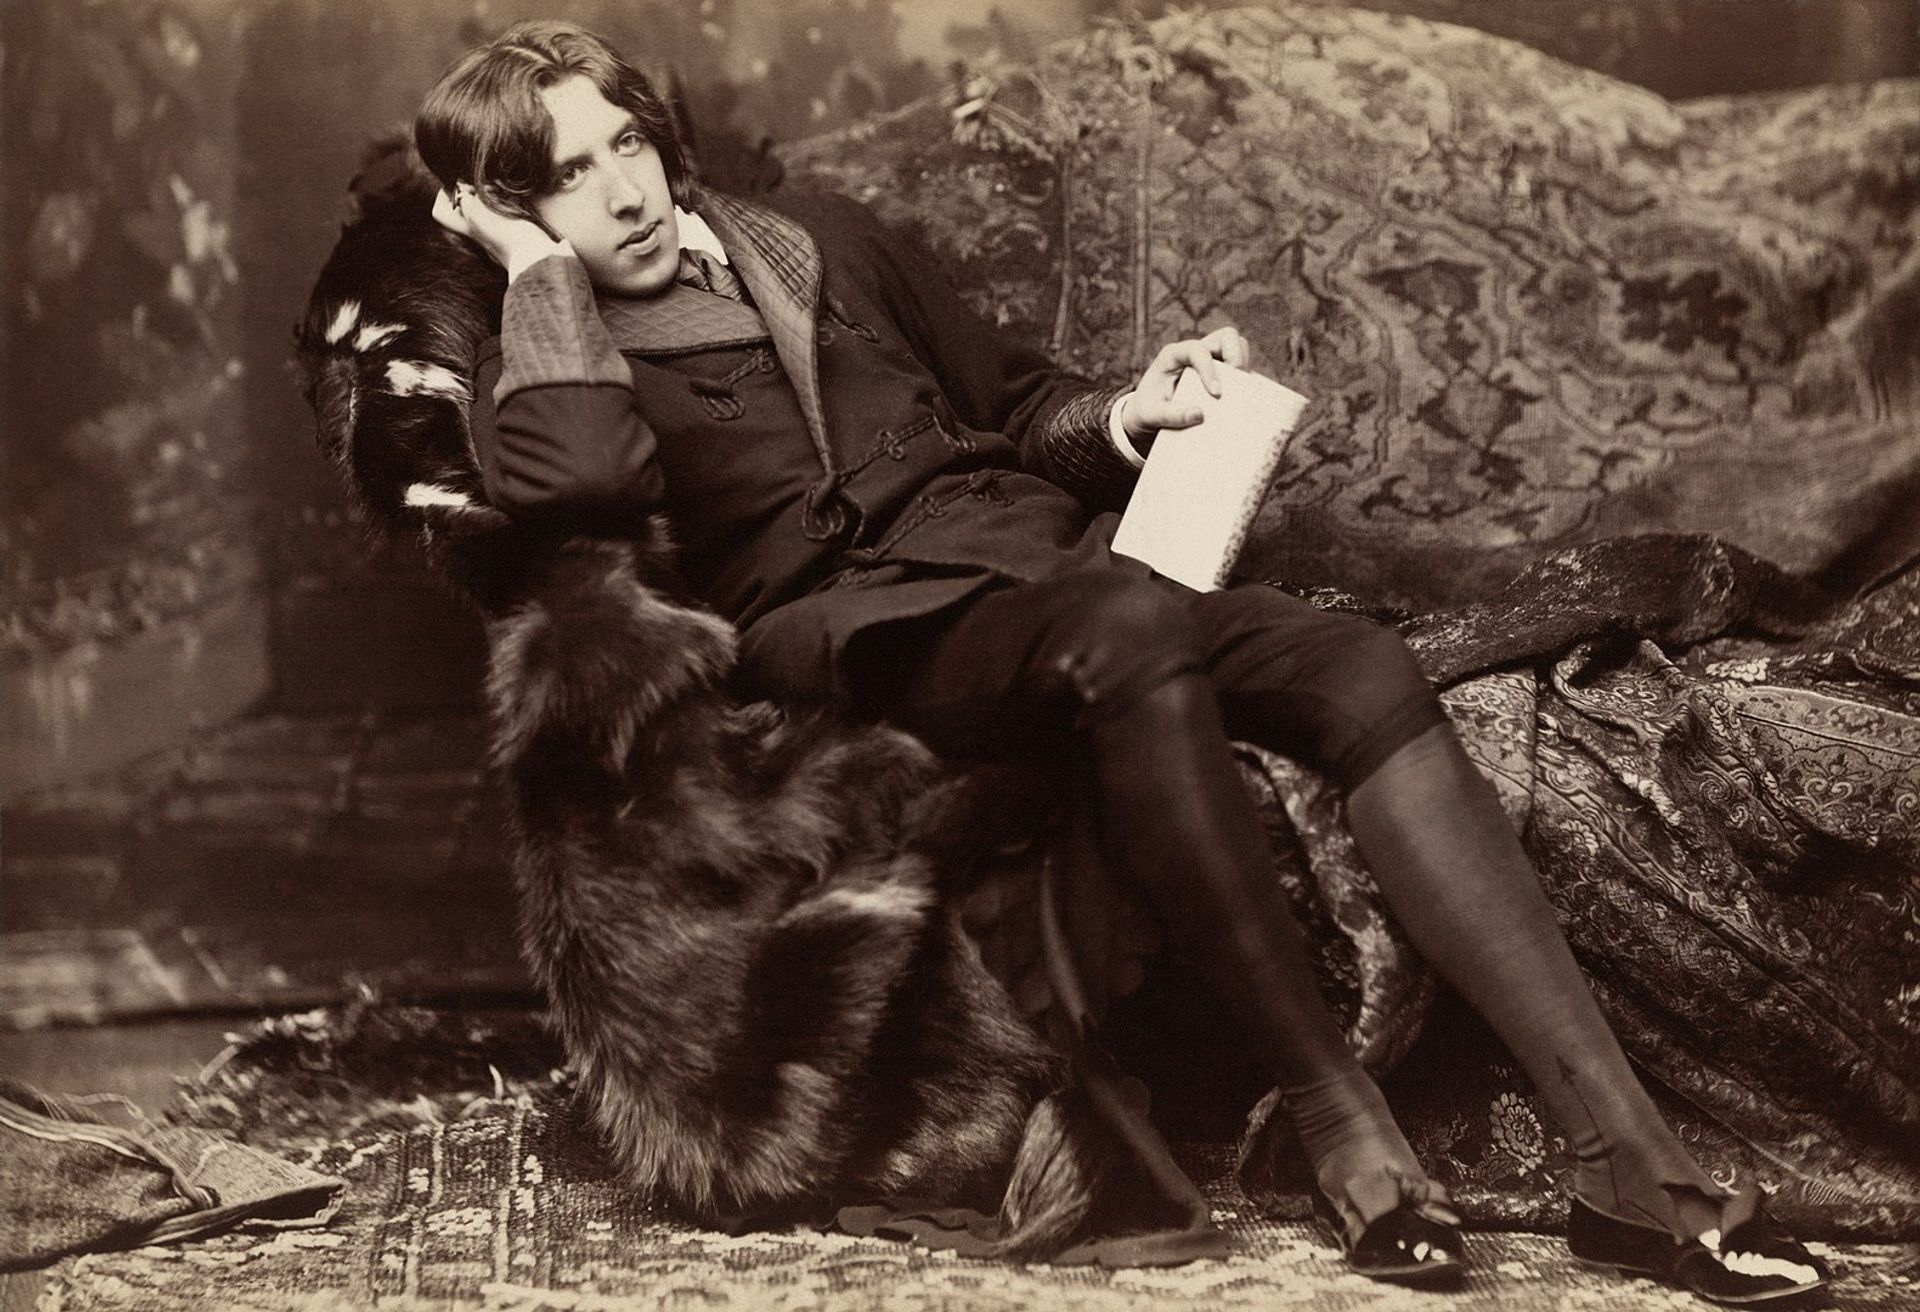 Oscar Wilde reclining with Poems, by Napoleon Sarony in New York in 1882. 